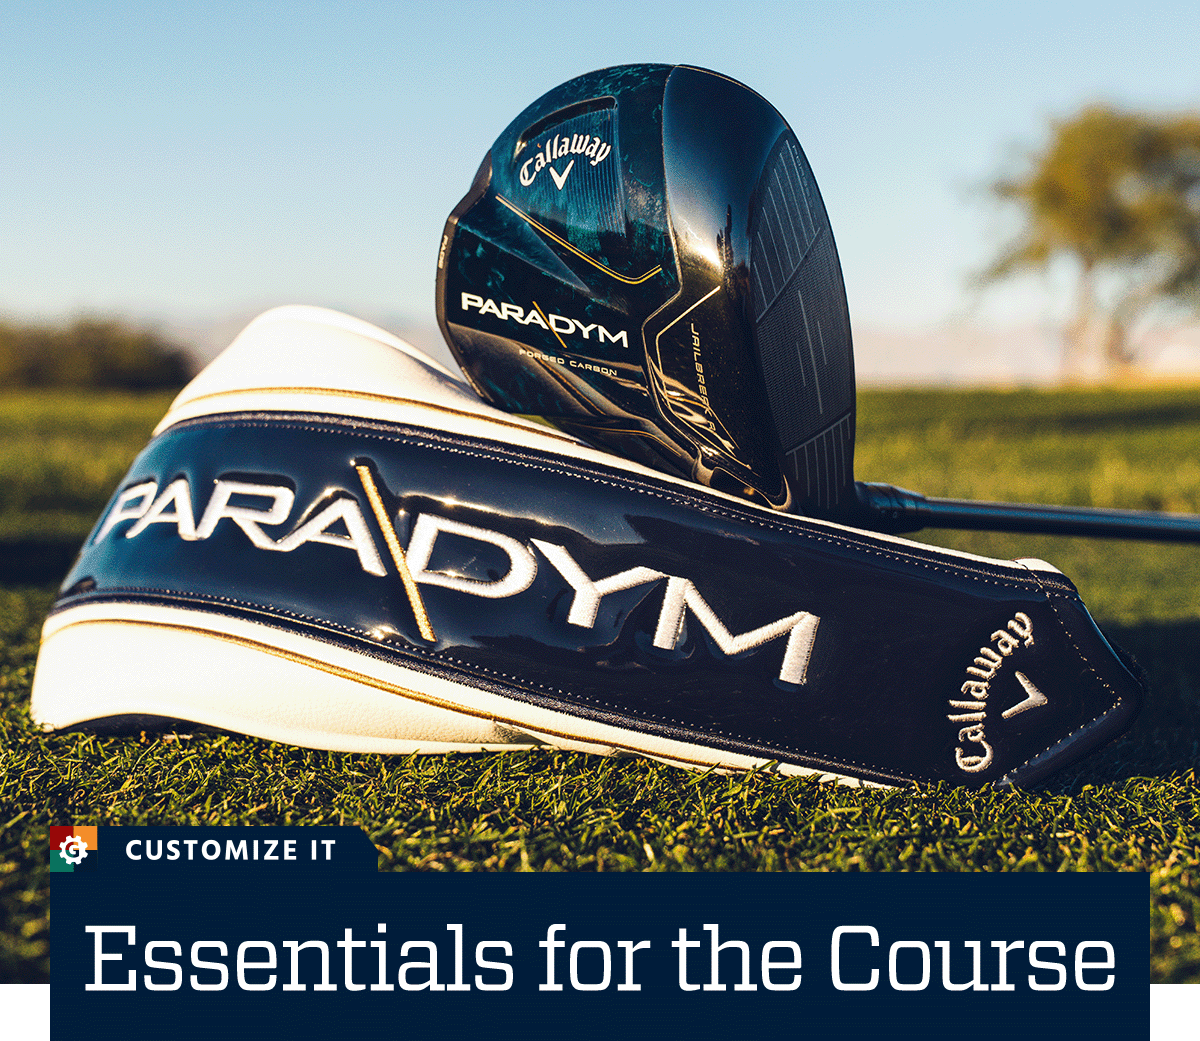  Essentials for the course. Customize it.